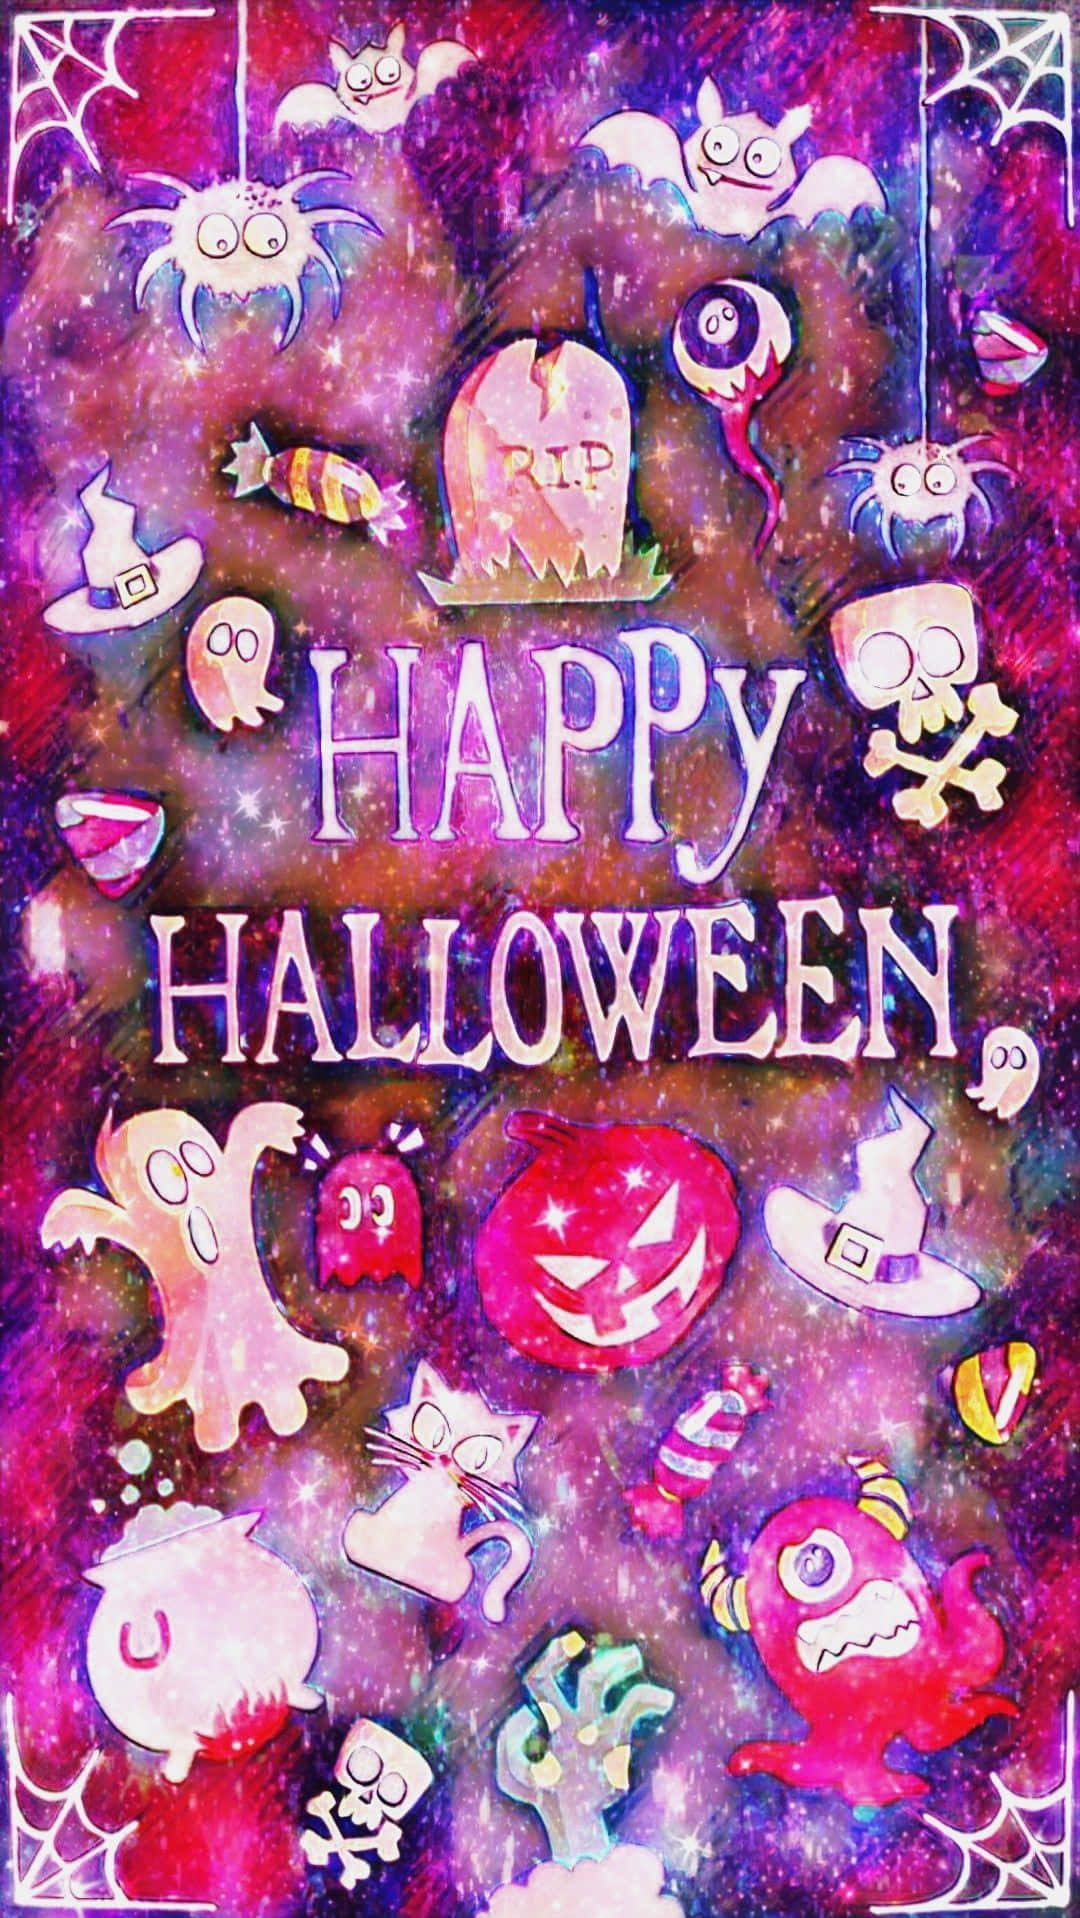 "Pink Halloween - a unique take on the ghoulish holiday!" Wallpaper